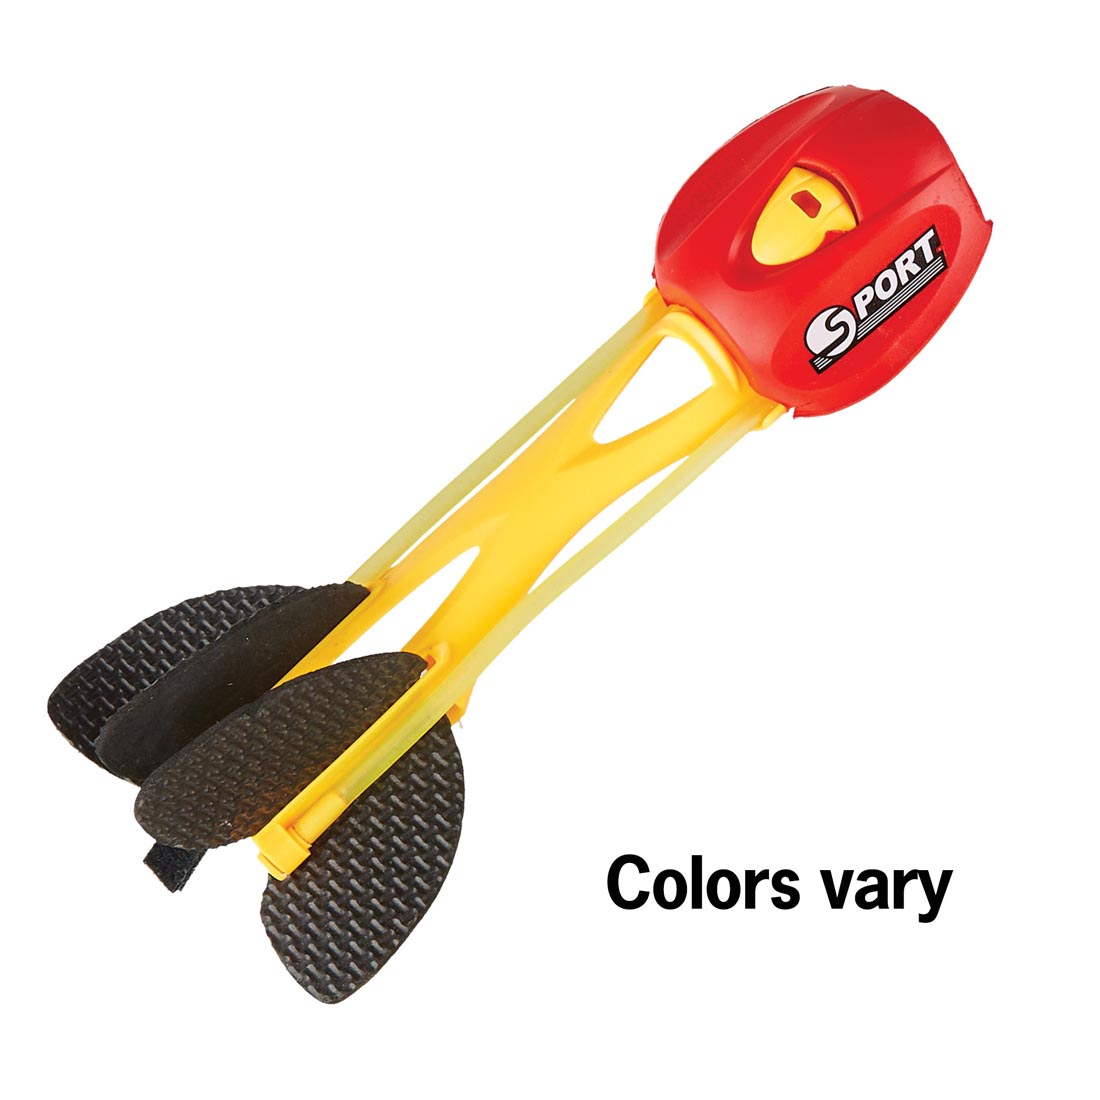 Slingshot Rocket By Kidoozie with the text Colors vary